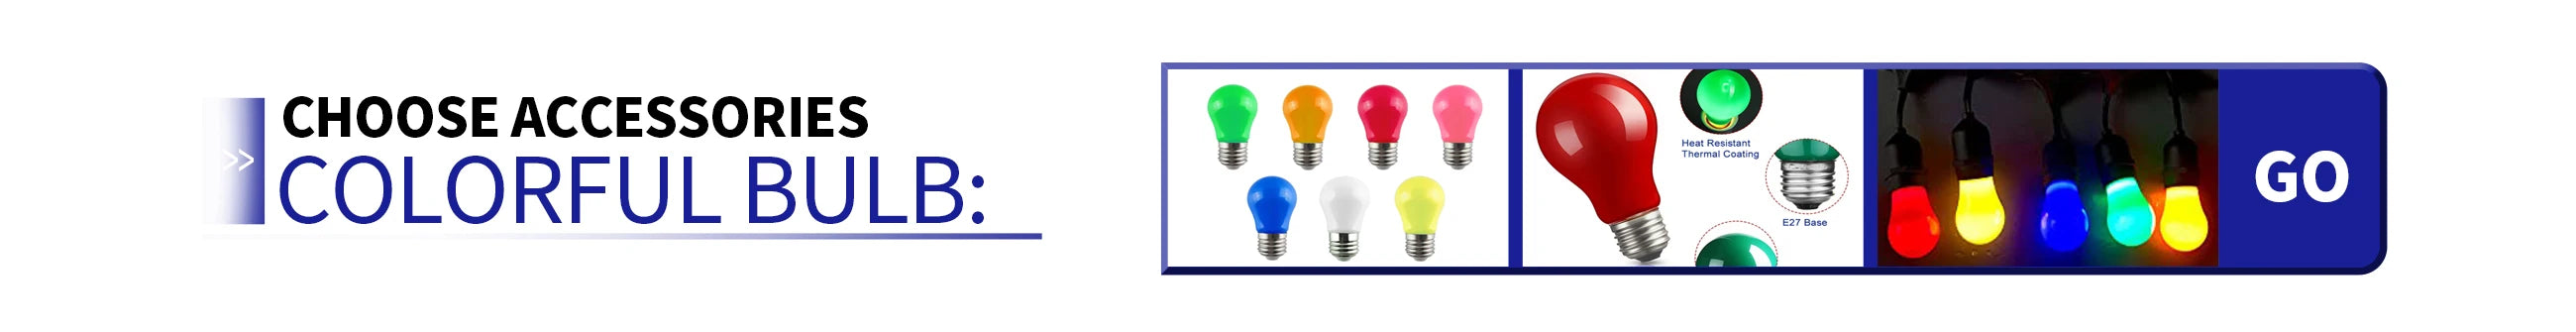 Colorful LED bulb with thermal coating for heat resistance and E27 base for easy connections.